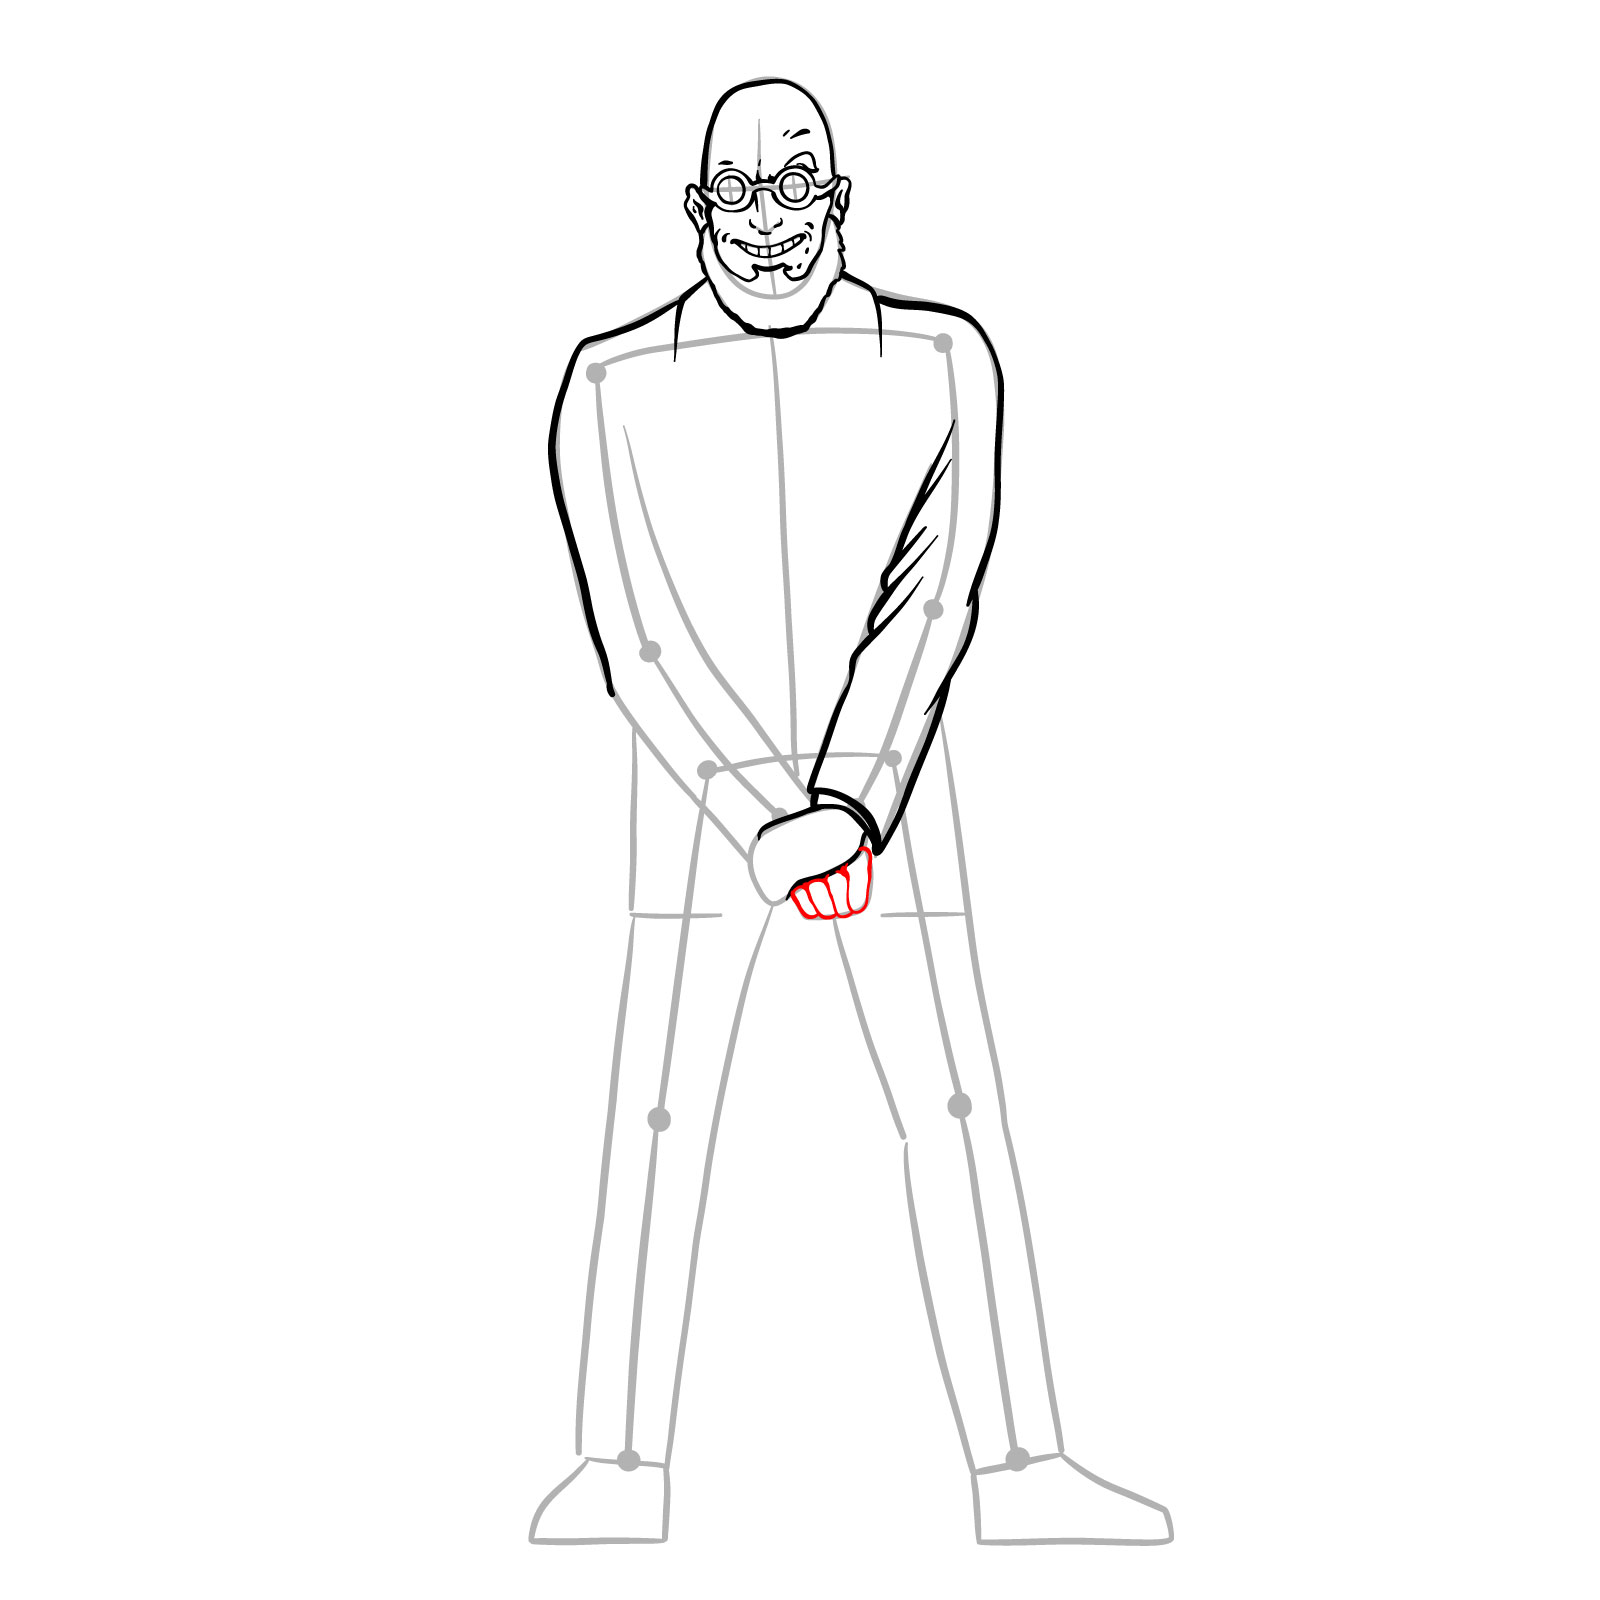 How to draw Dr. Hugo Strange from DC Comics - step 19